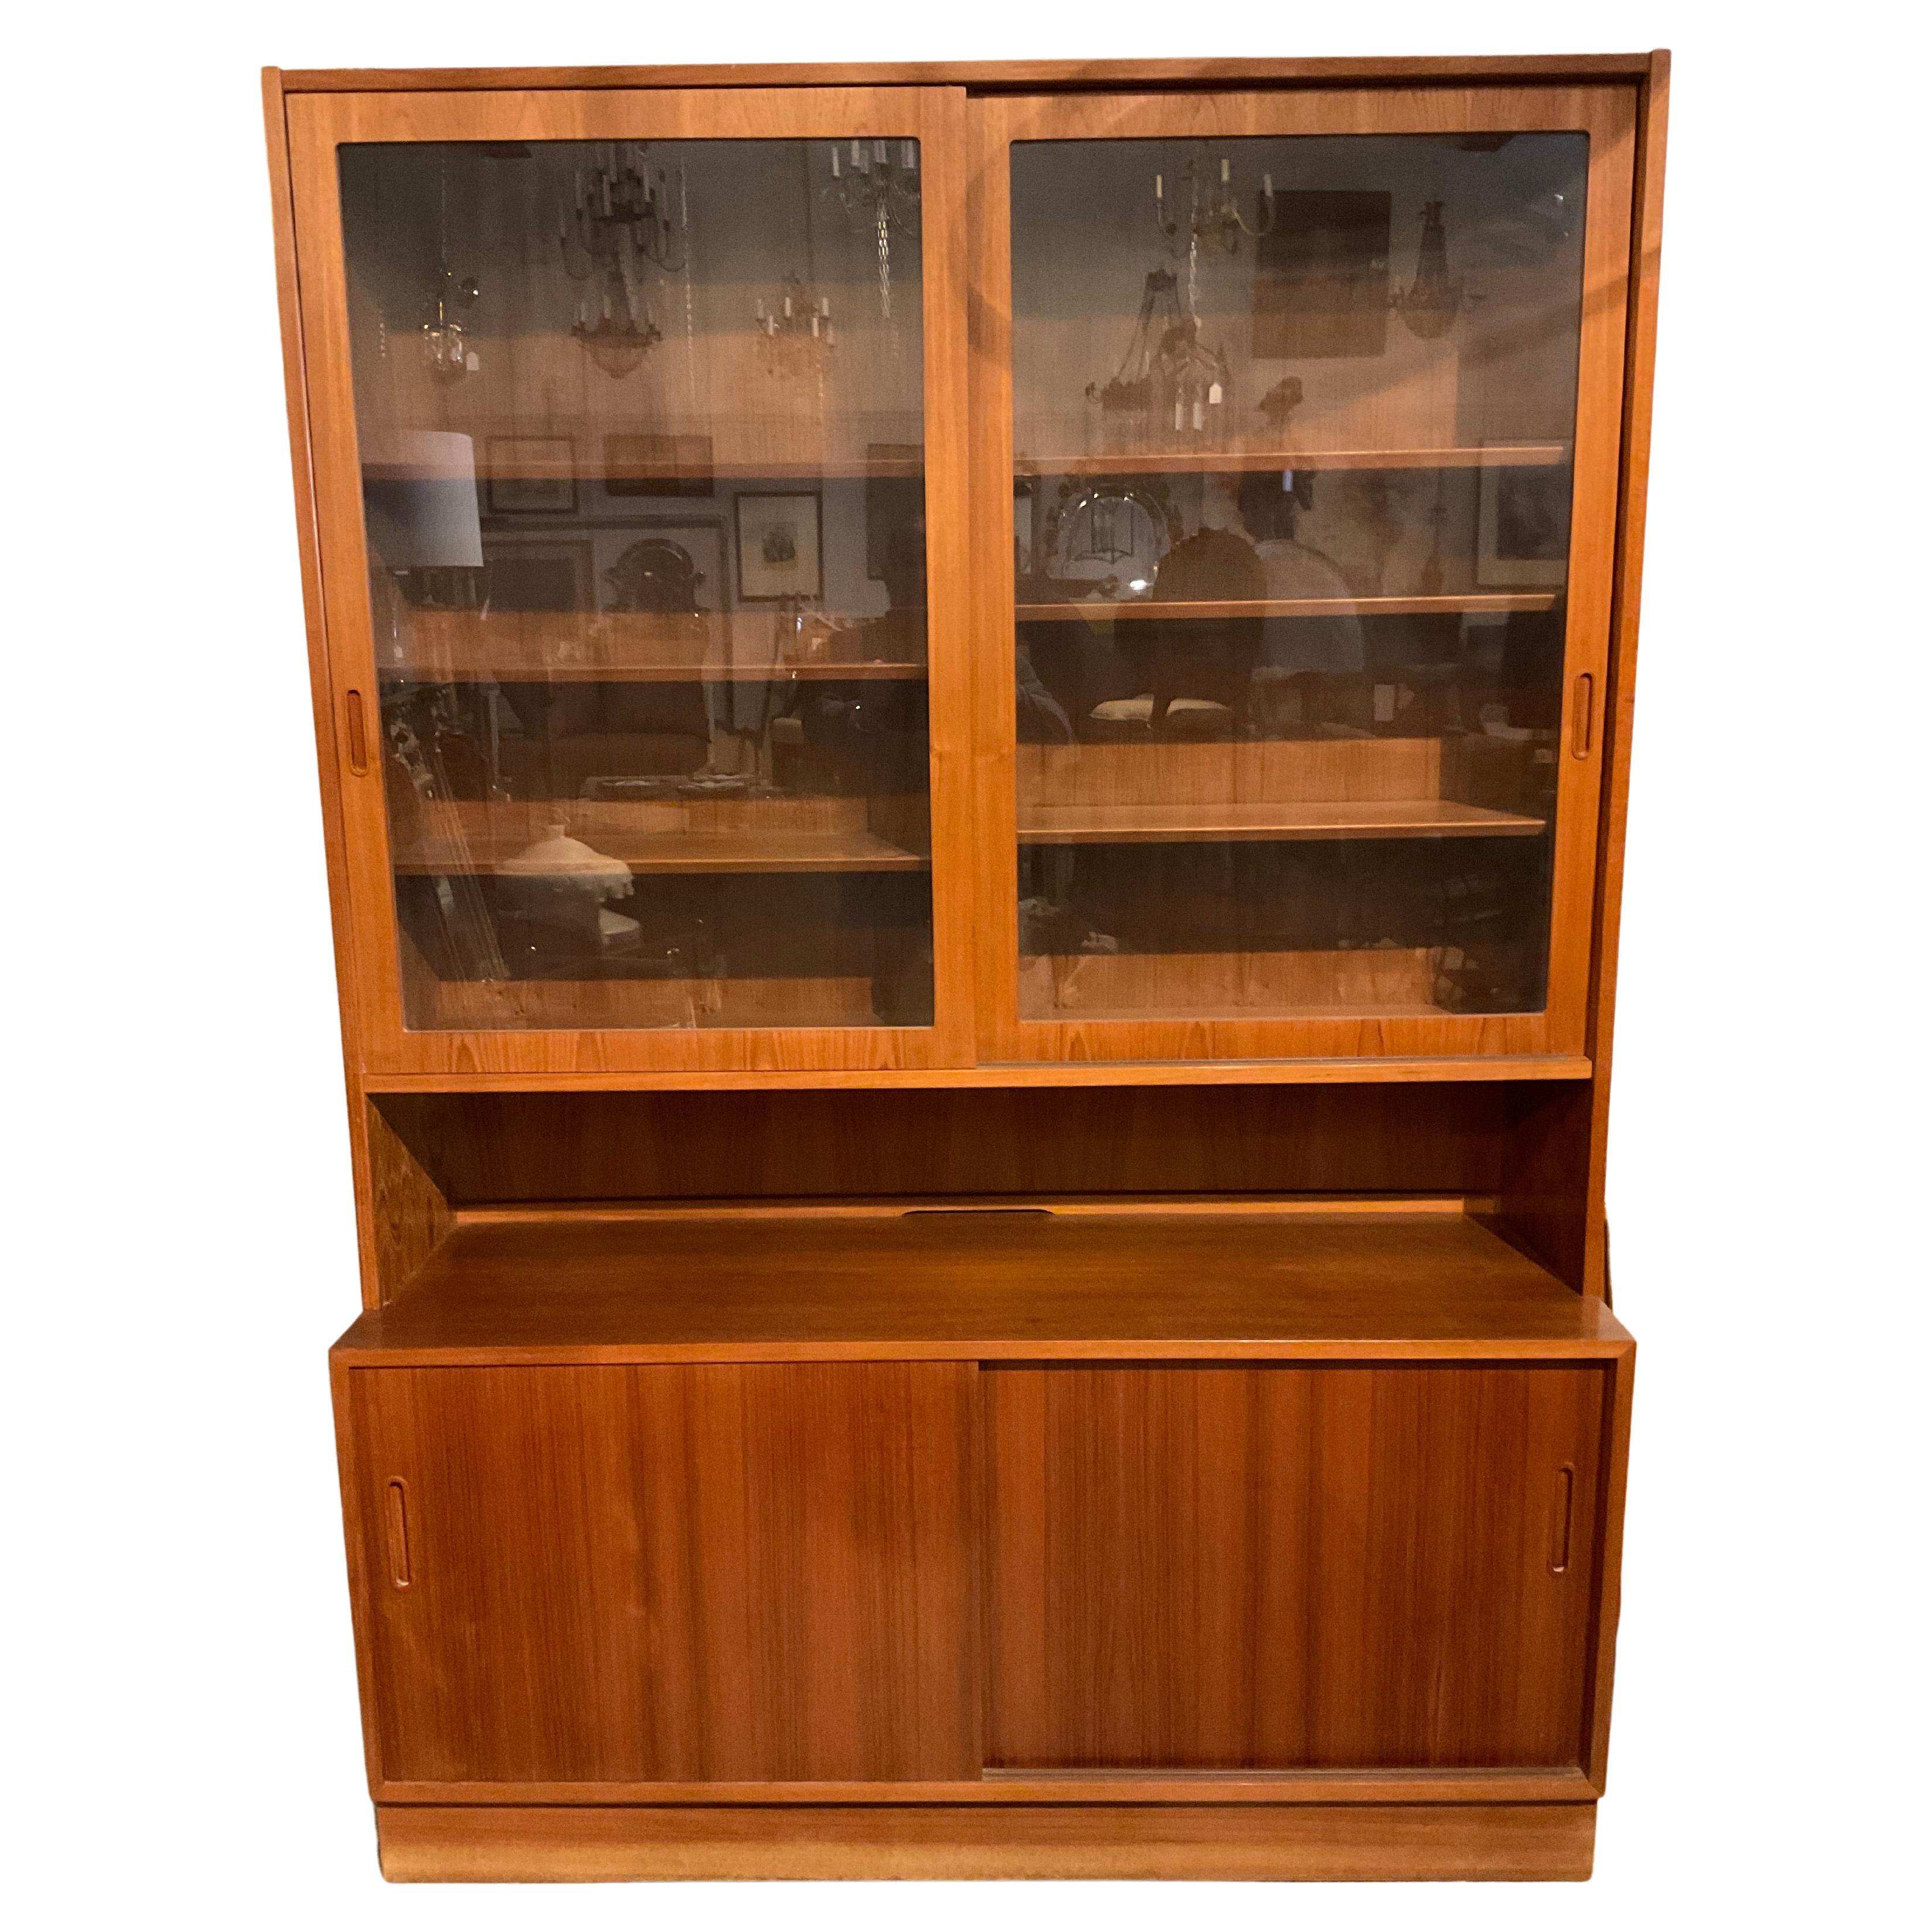 1970s Poul Hundevad Teak Glass Door Bookcase / China Cabinet Made In Denmark For Sale